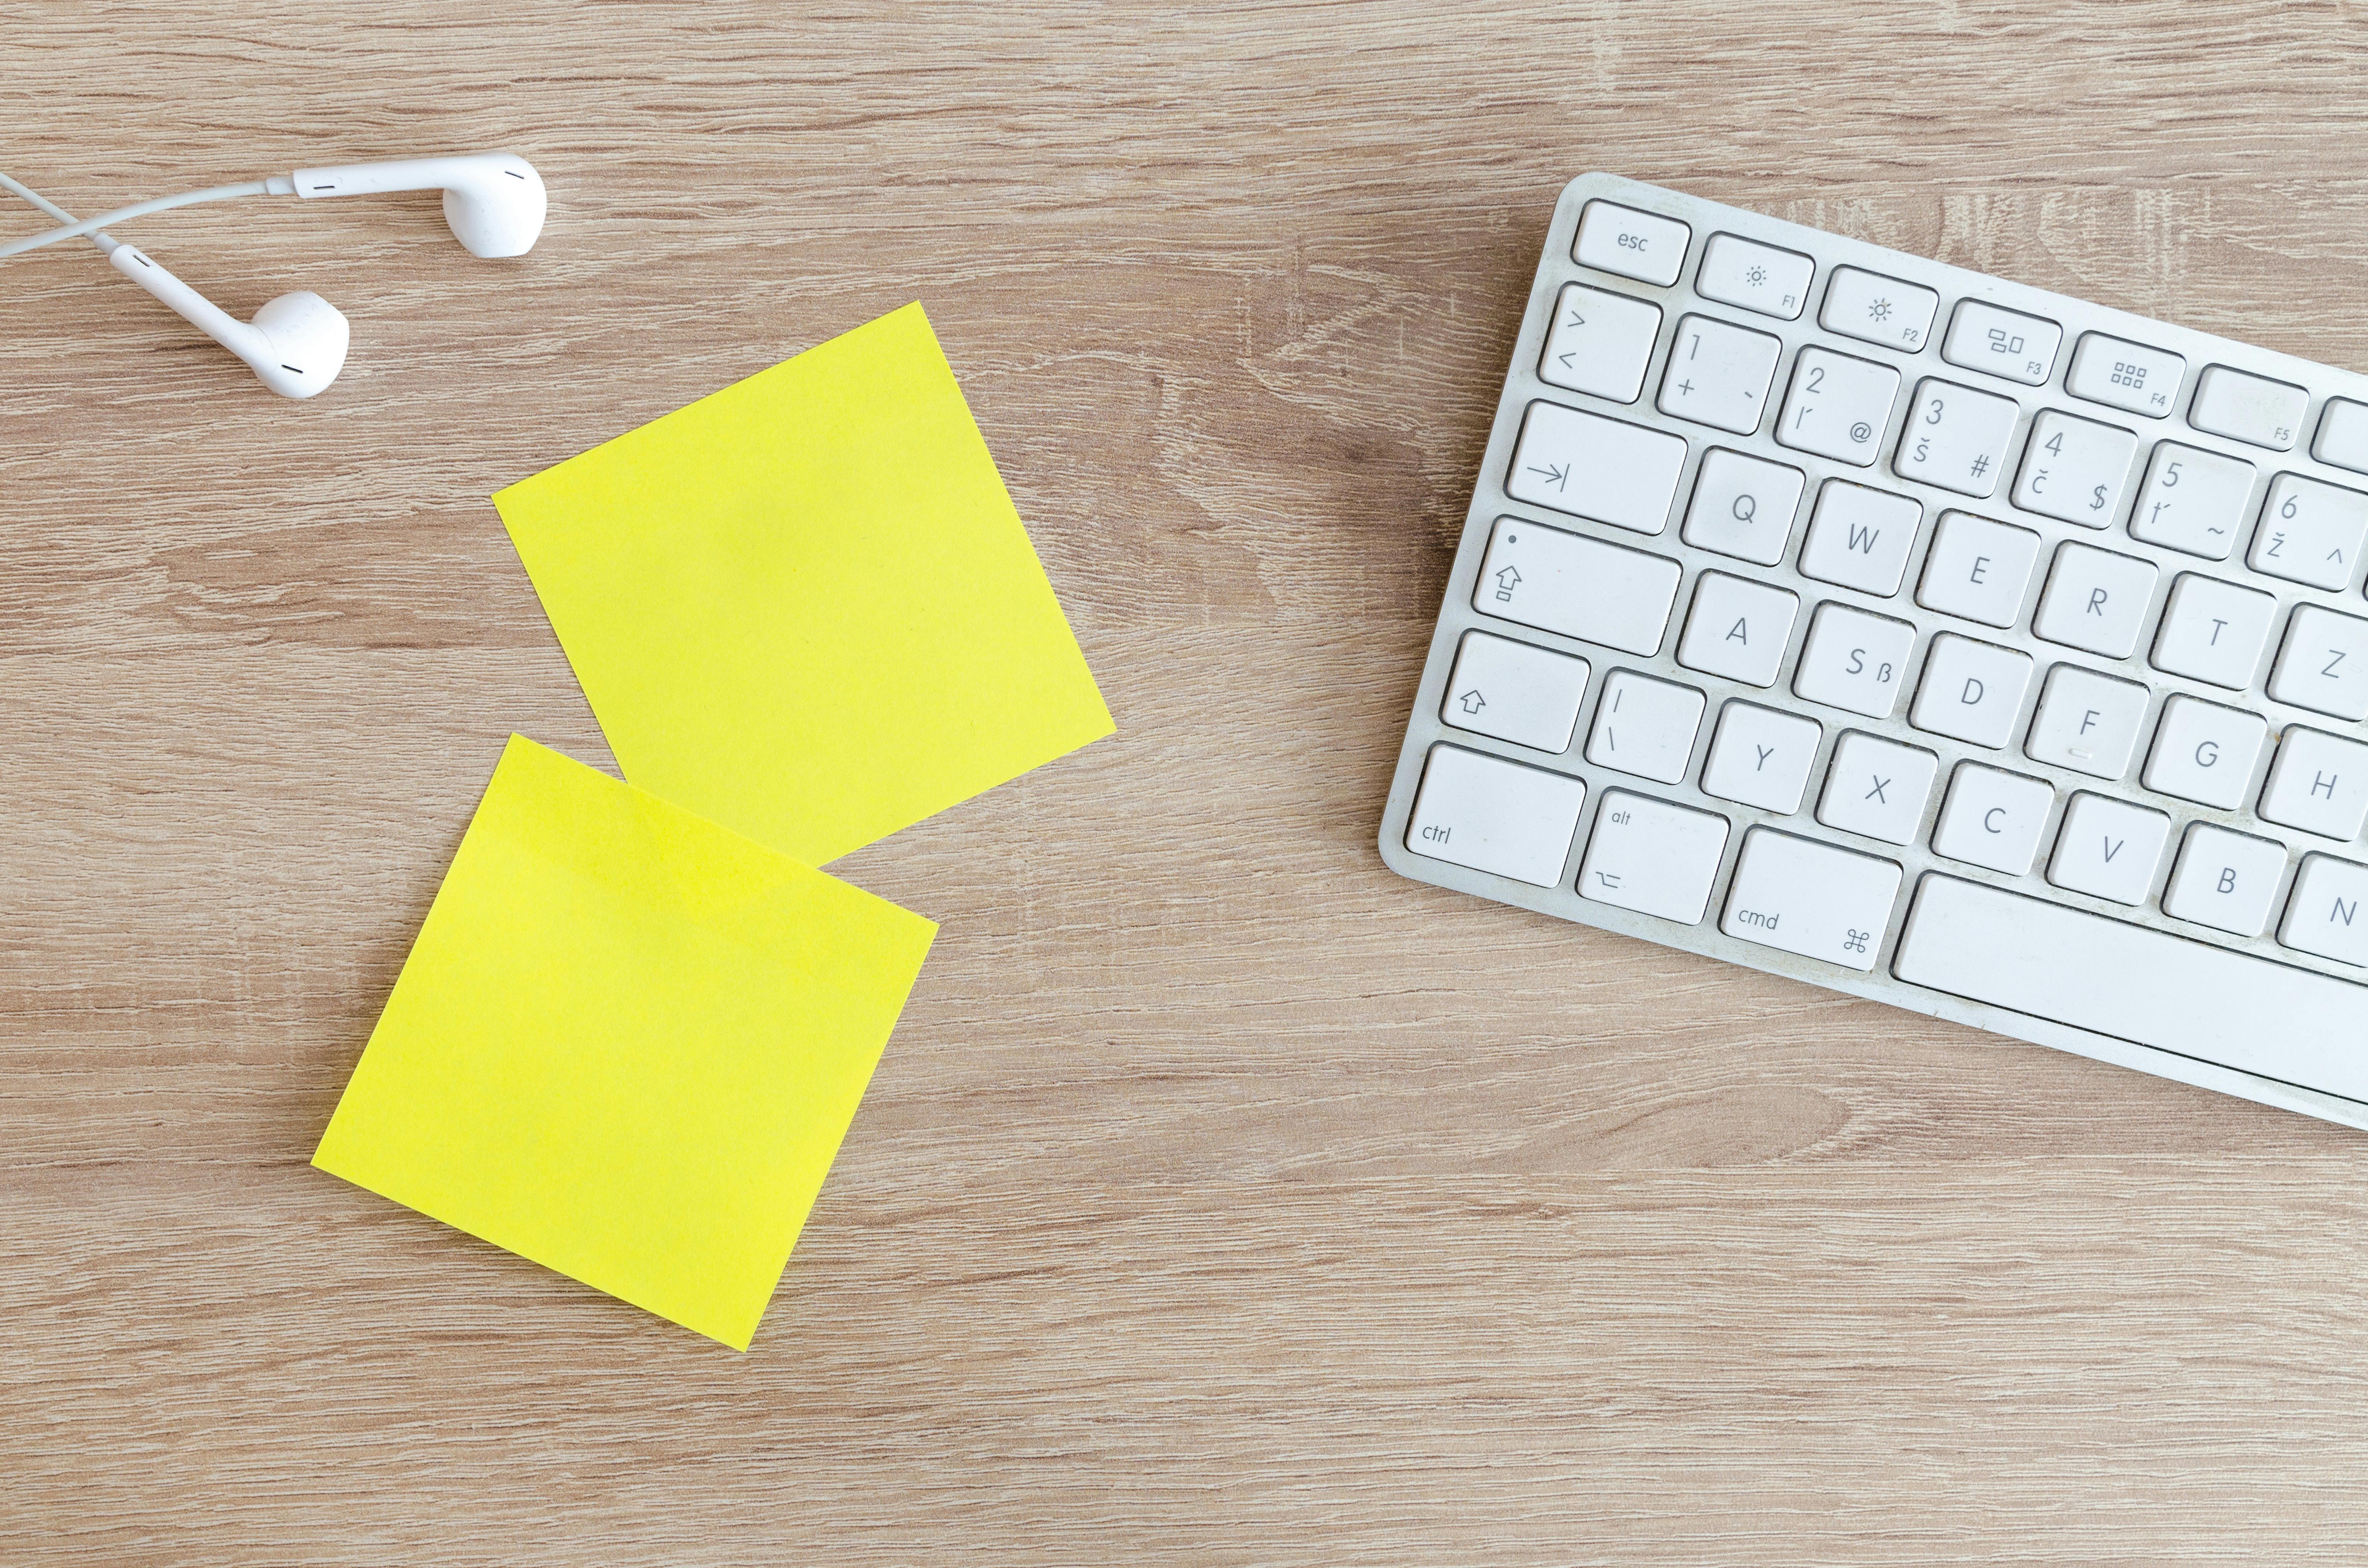 How to Create and Use Sticky Notes in Windows 11